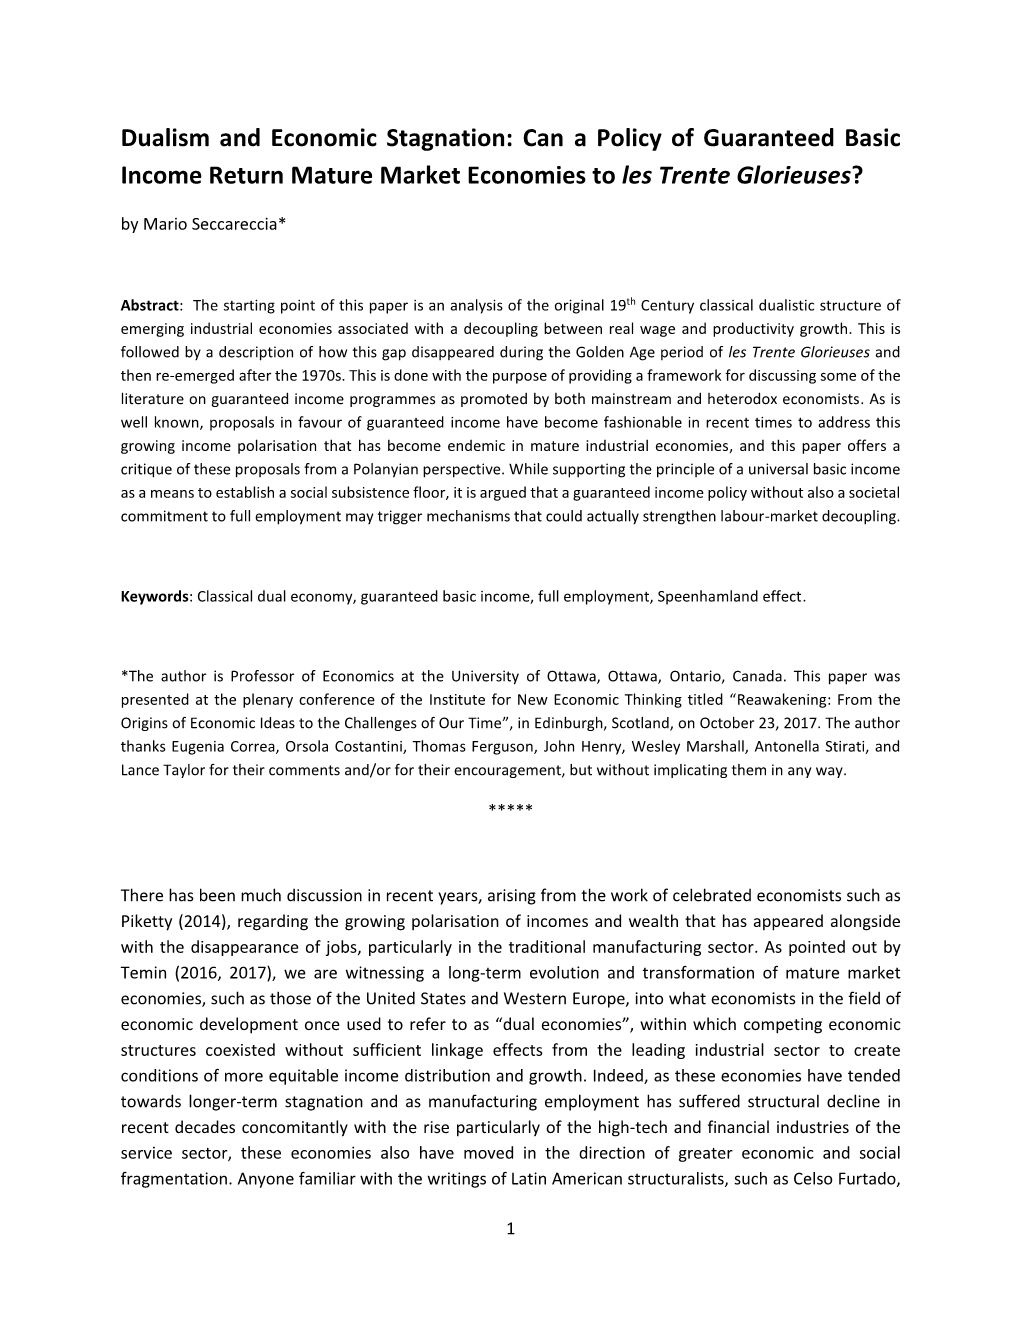 Can a Policy of Guaranteed Basic Income Return Mature Market Economies to Les Trente Glorieuses? by Mario Seccareccia*